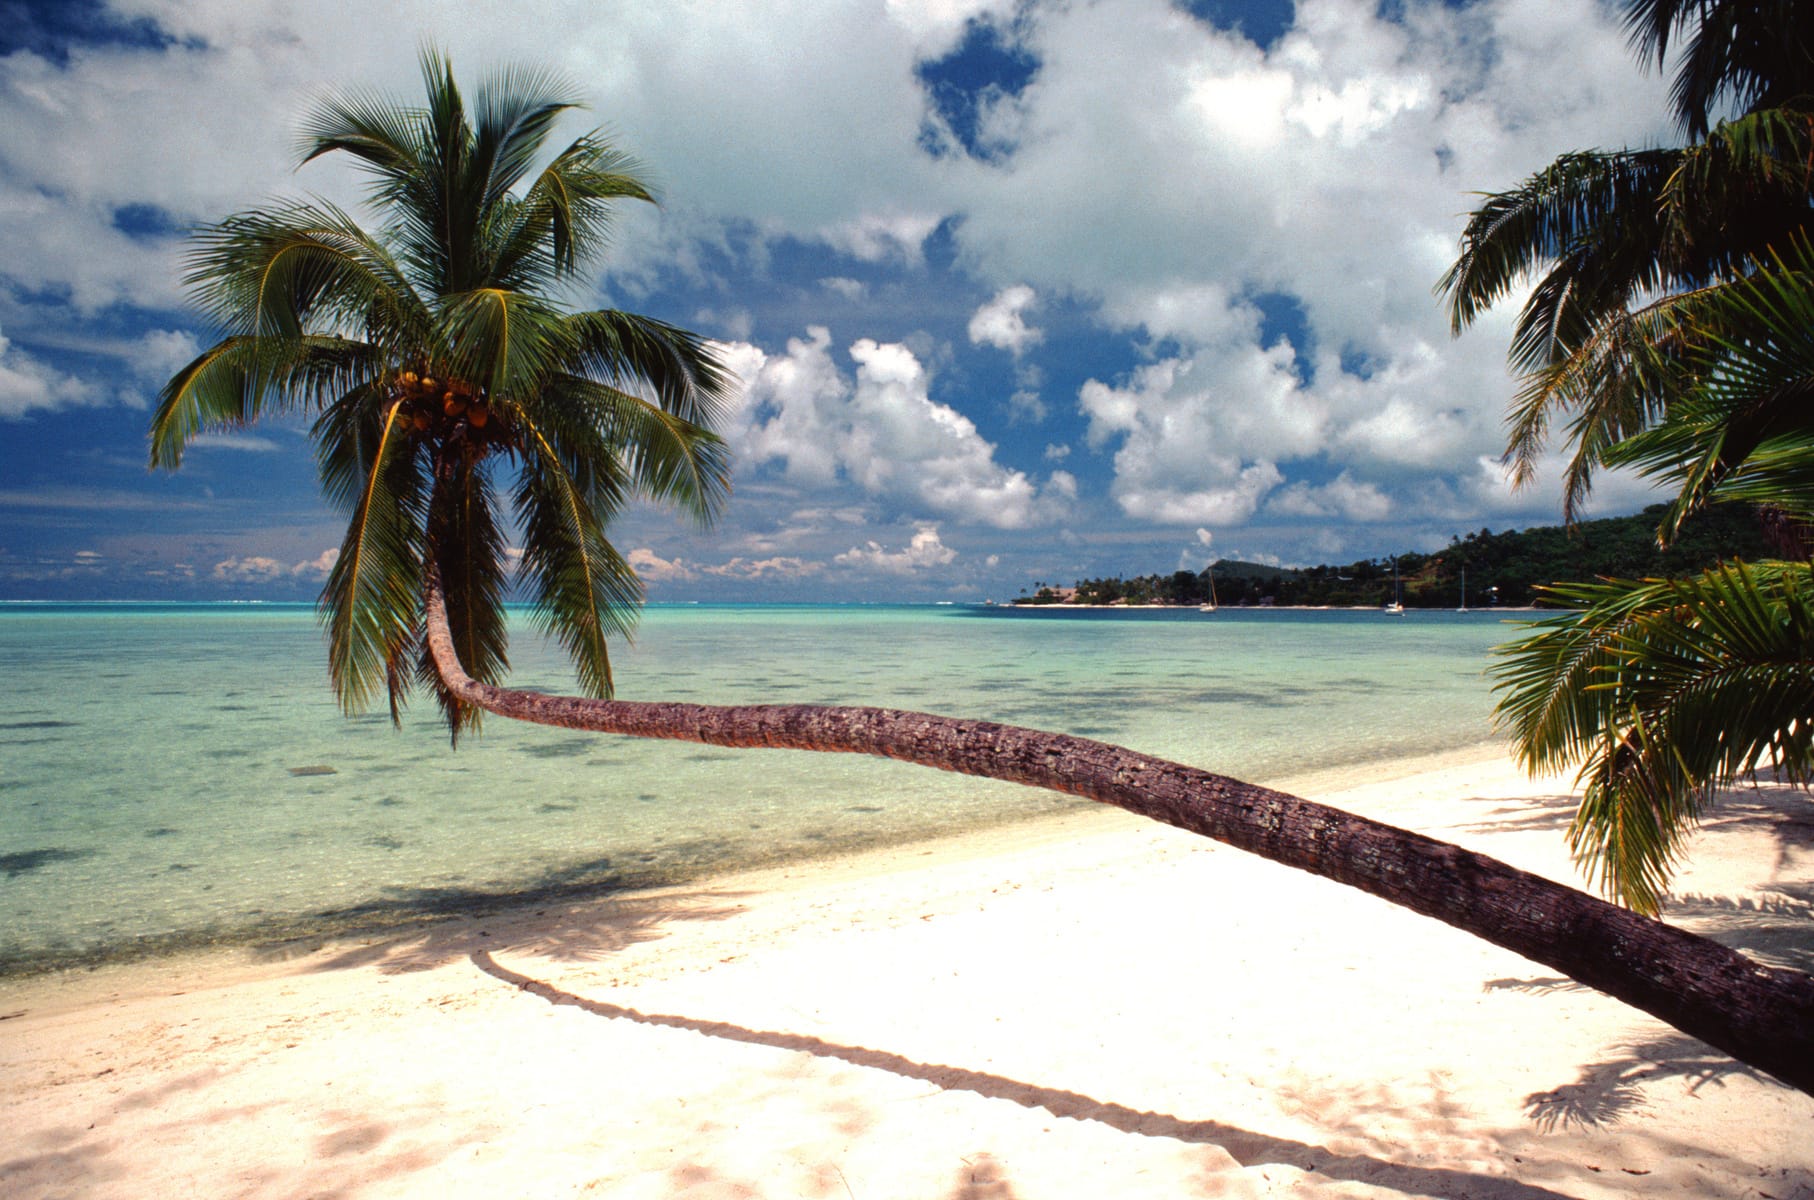 A tropical beach view with palm trees